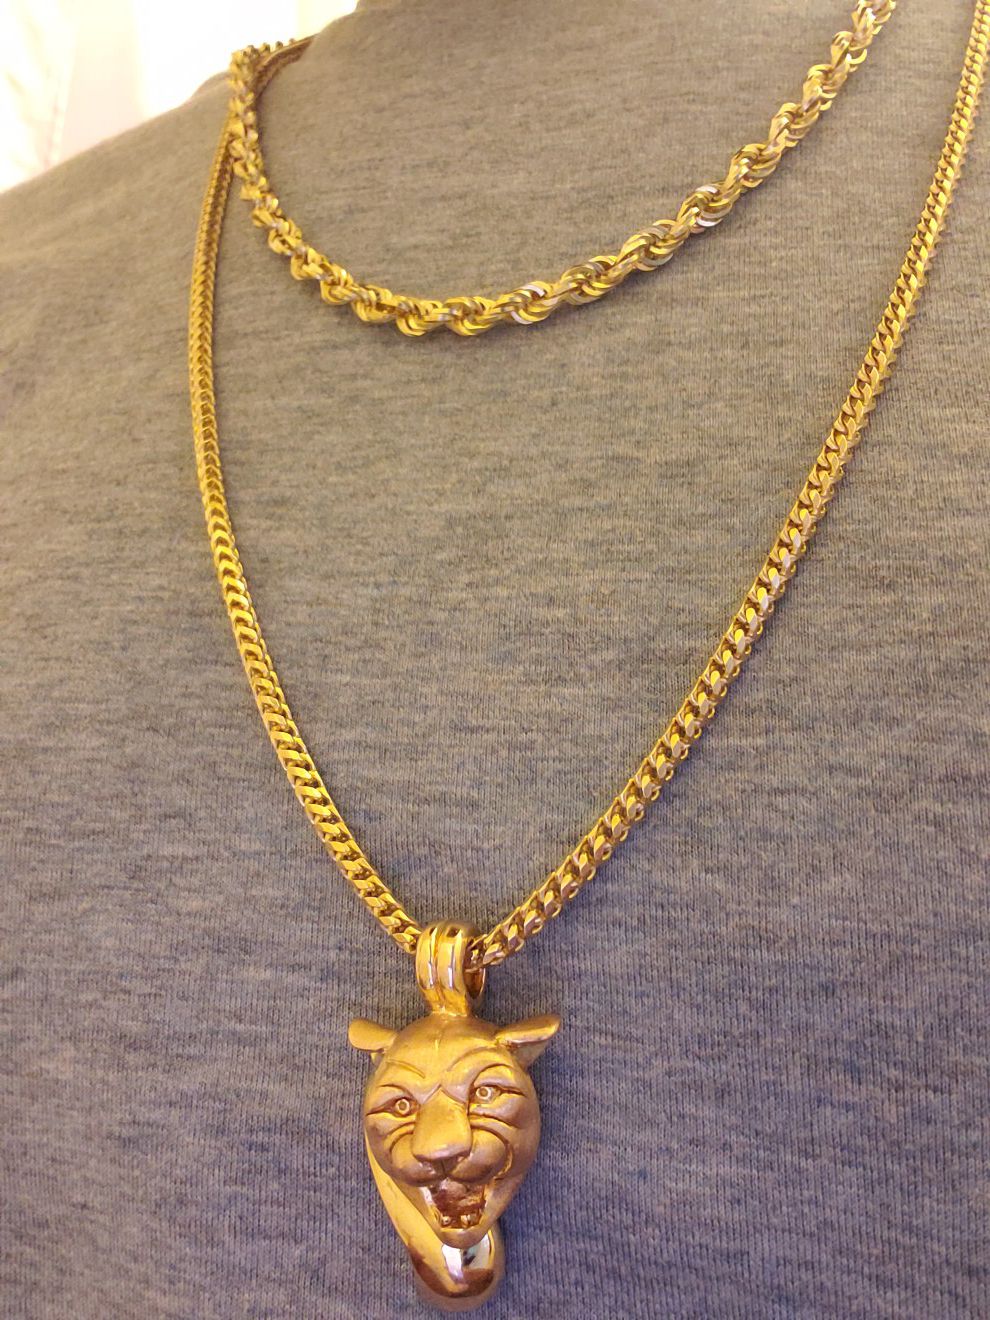 10k Gold chains with 14k Panther head Pendant